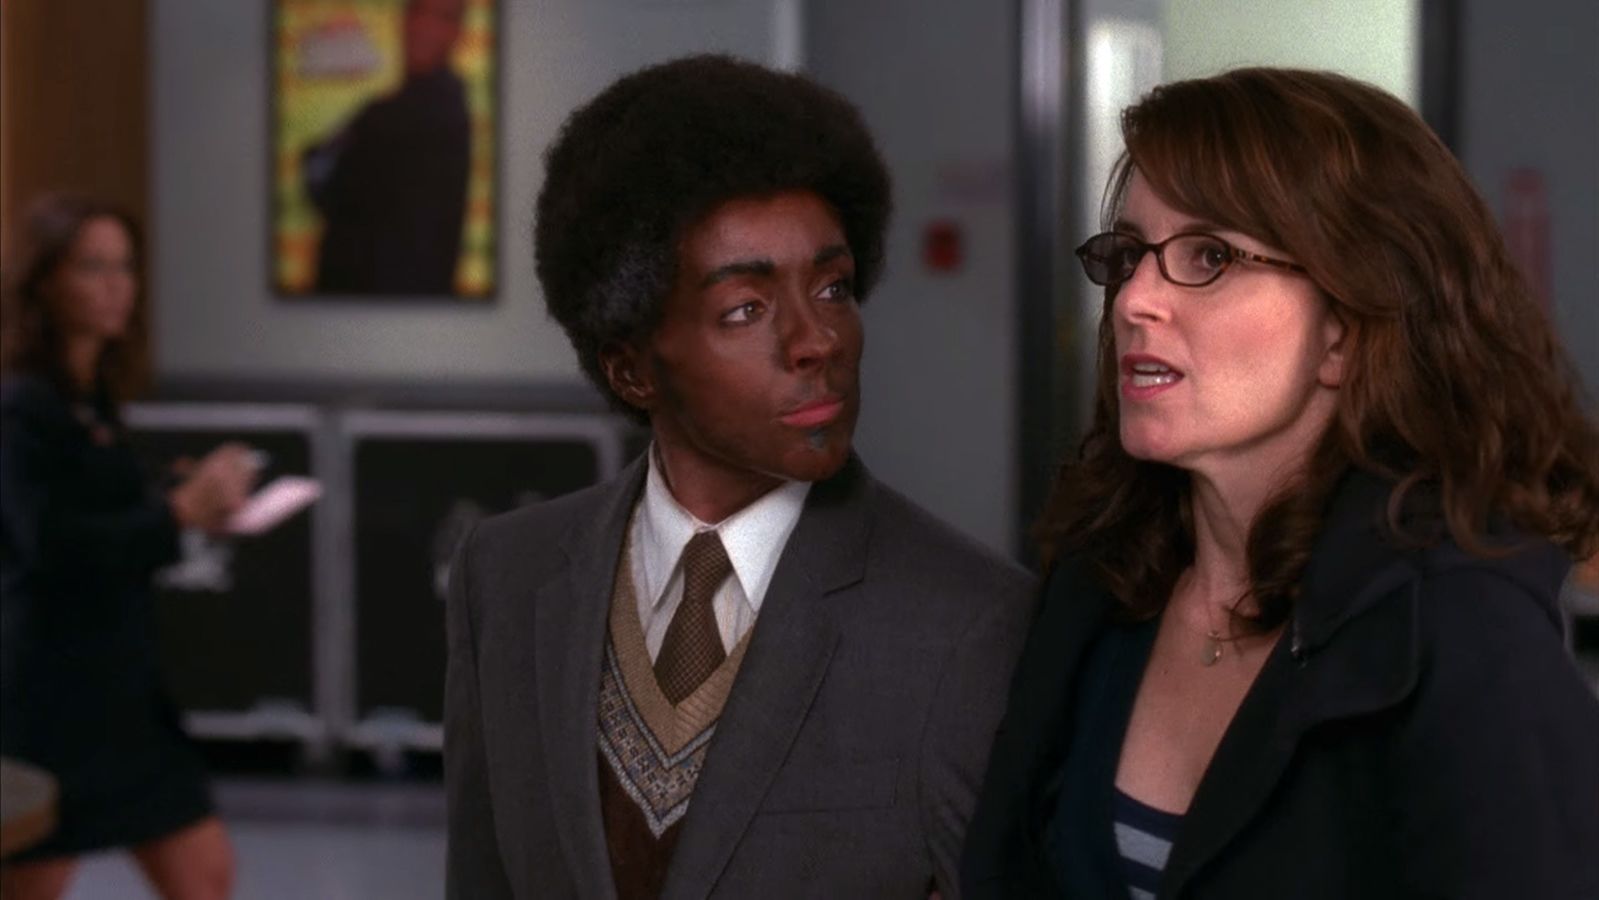 Jane Krakowski, left, appears in blackface in an episode of the third season of "30 Rock" in which her character, a White woman, dresses as a Black man while Black comedian Tracy Morgan dresses as a White woman.